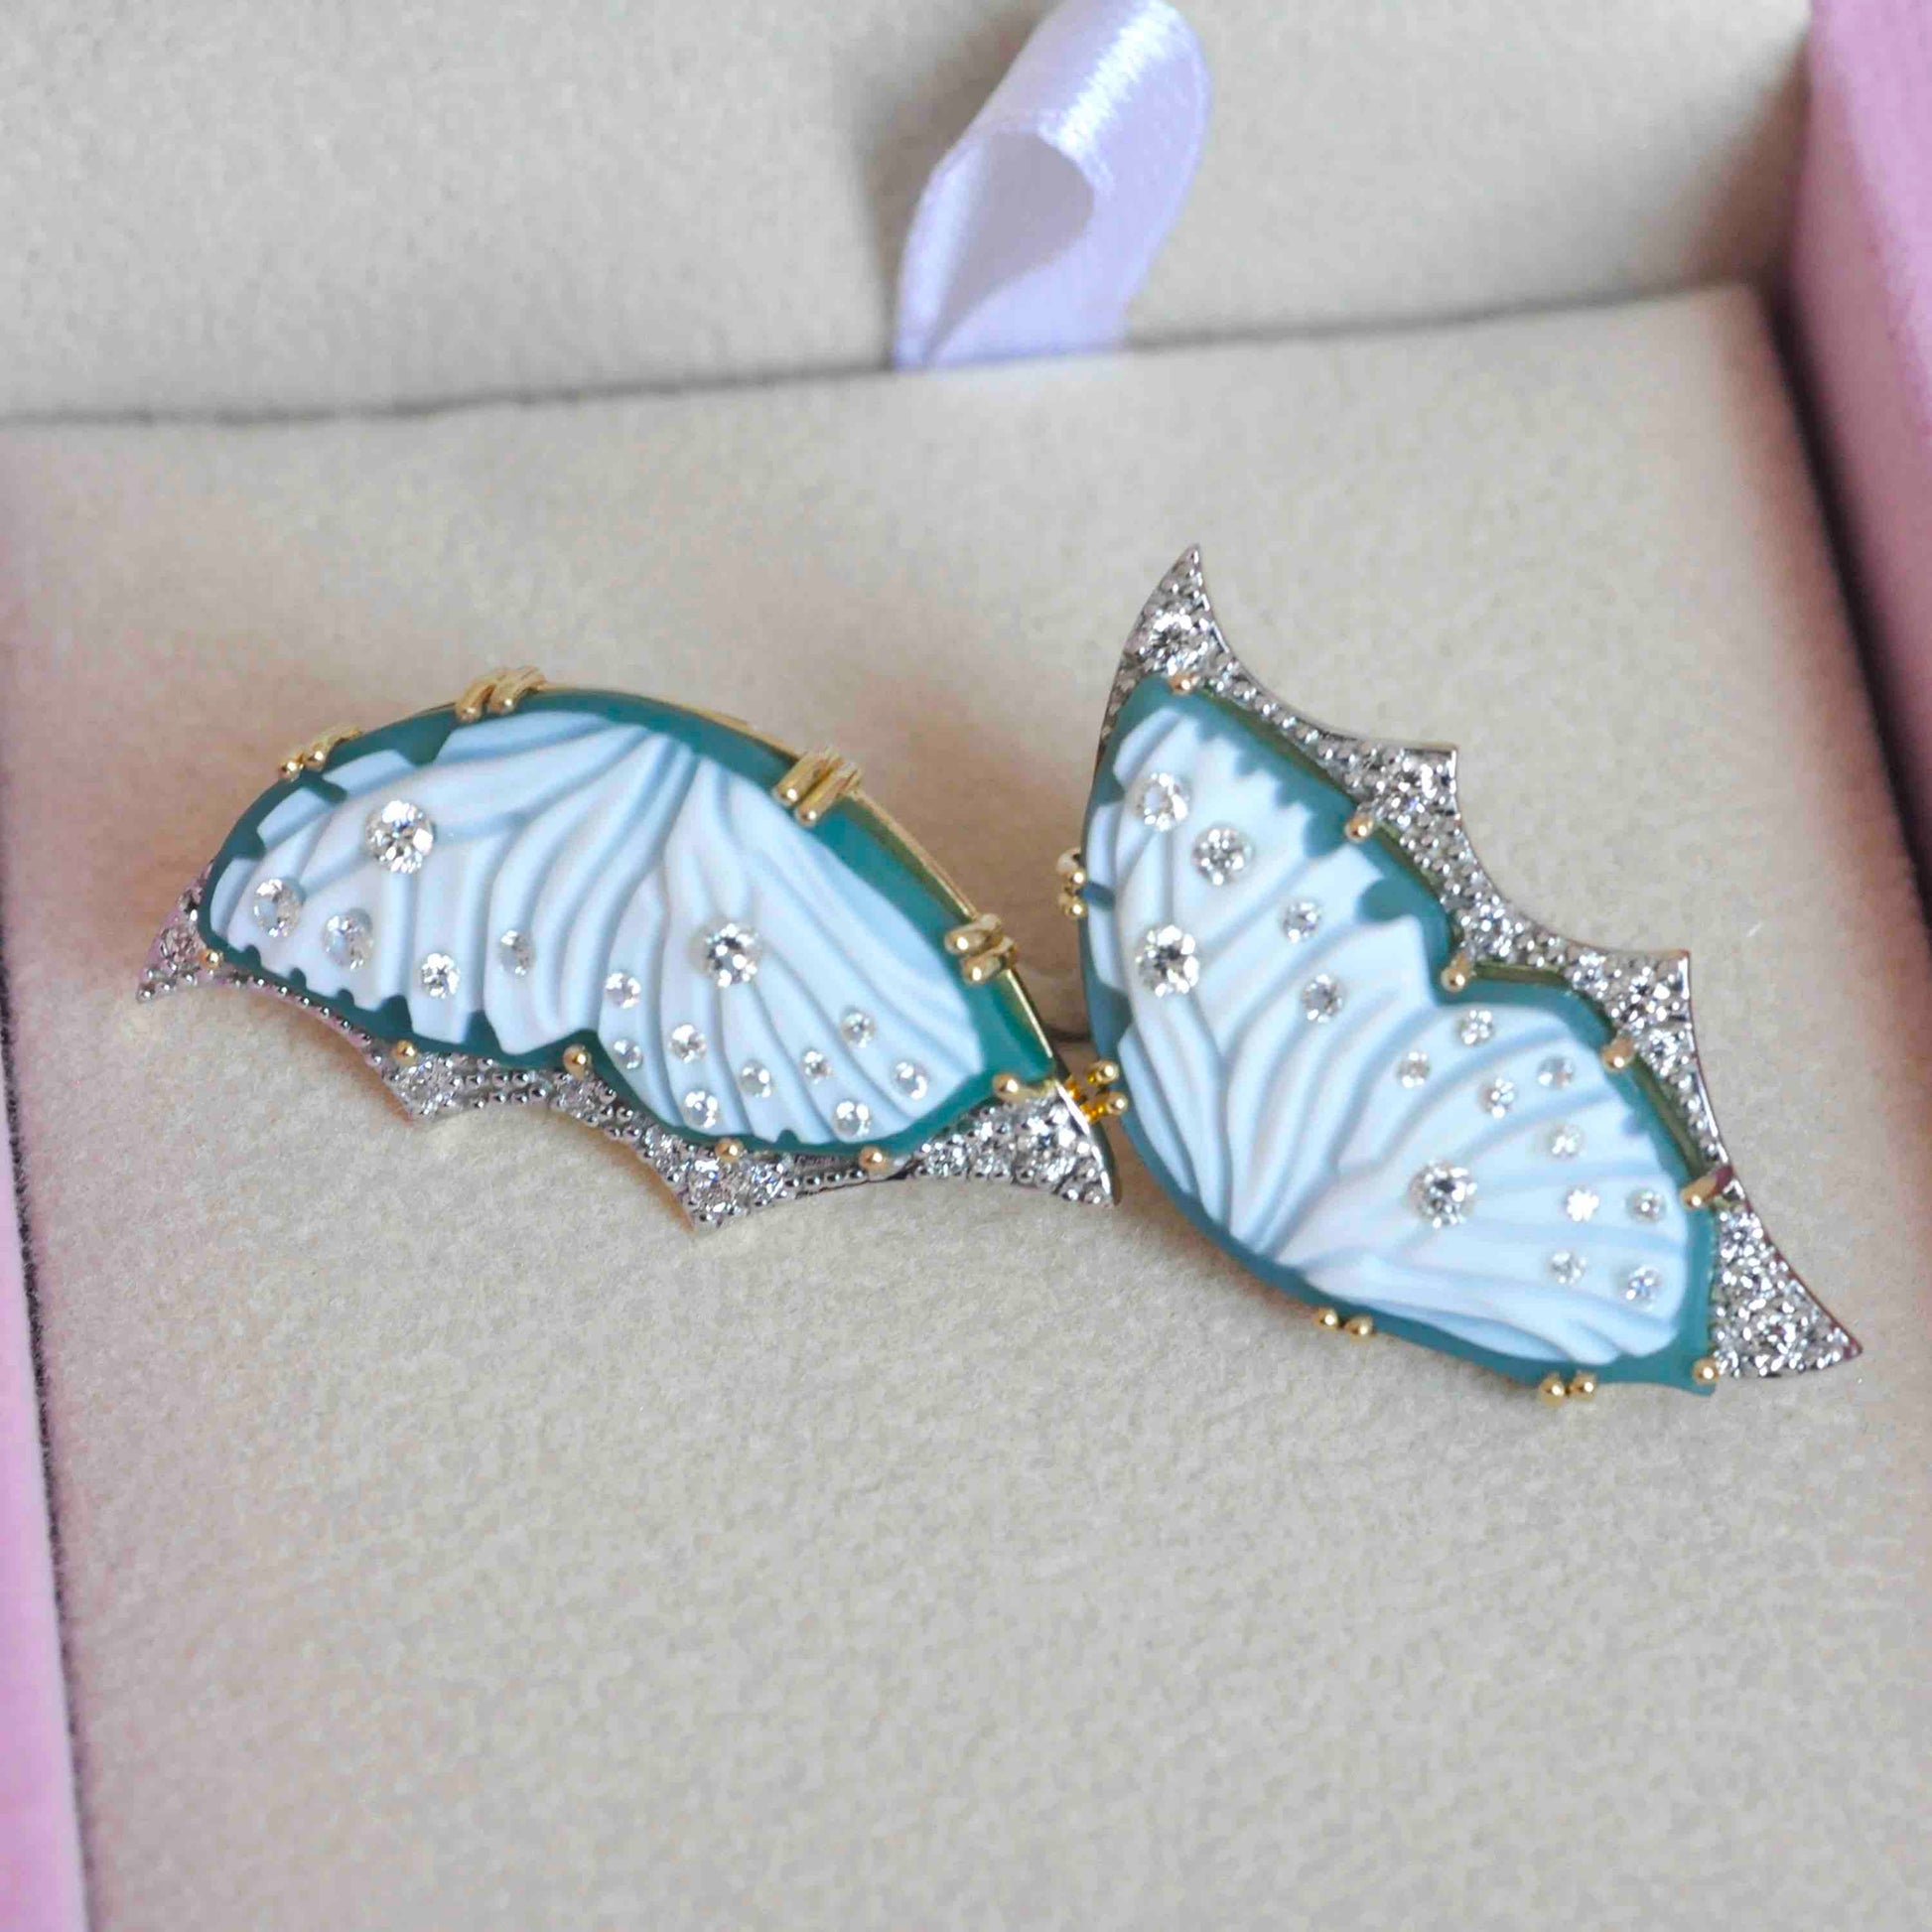 18K Gold Hand-Carved Green Agate Butterfly Diamond Stud Earrings - Vaibhav Dhadda Jewelry